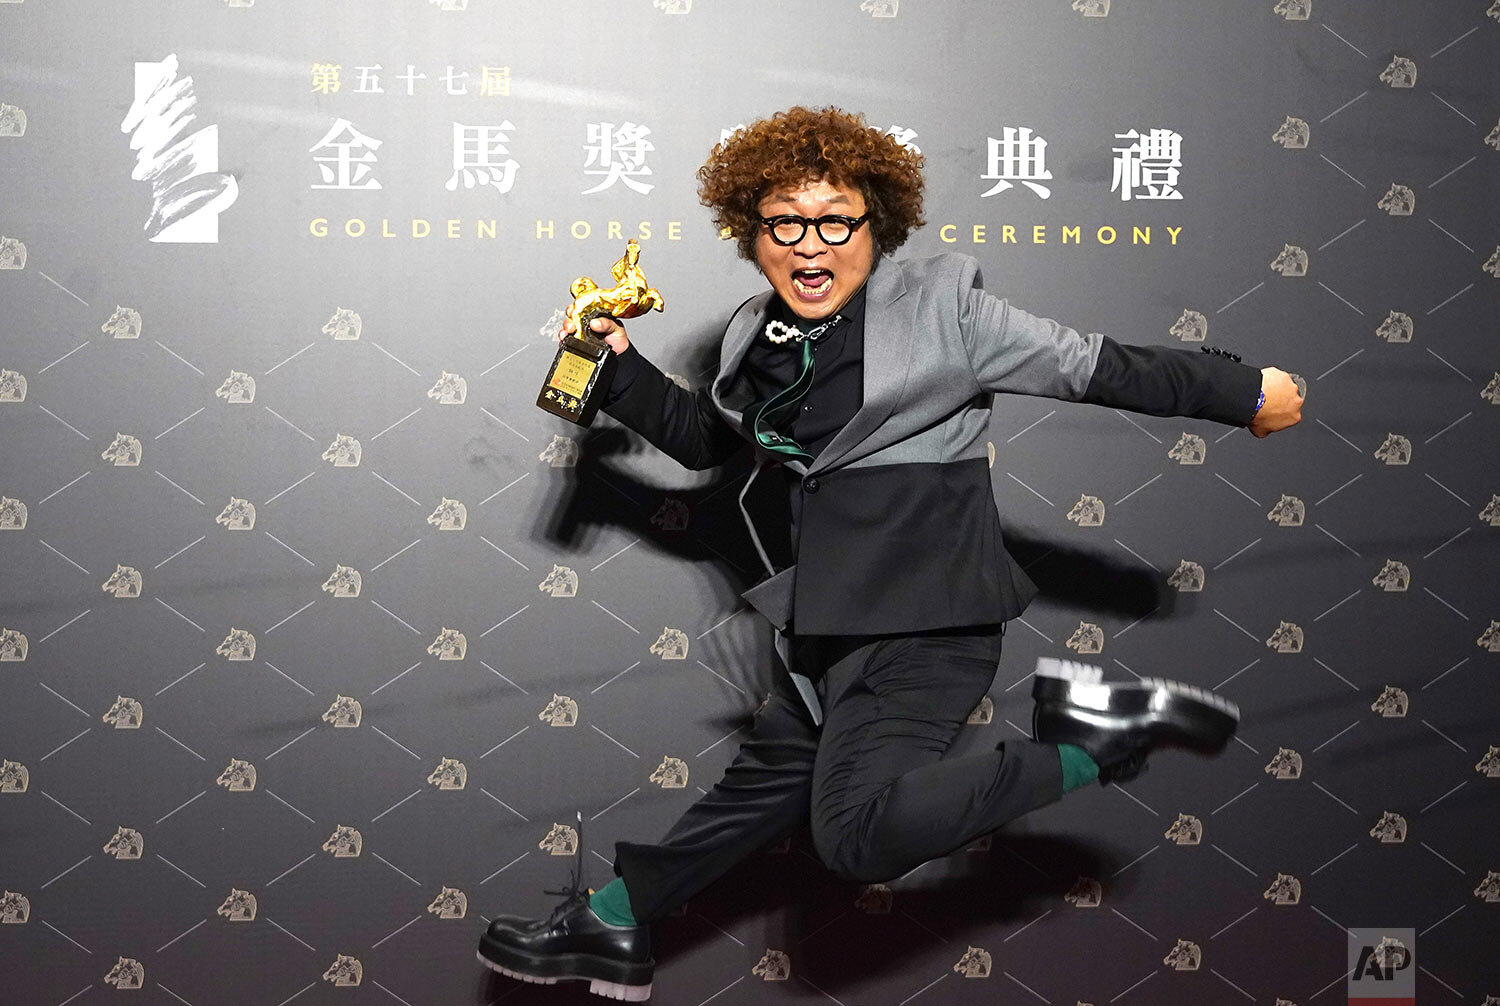  Taiwanese actor Nadow Lin holds his award trophy for Best Supporting Actor at the 57th Golden Horse Awards in Taipei, Taiwan, Saturday, Nov. 21, 2020.  (AP Photo/Billy Dai) 